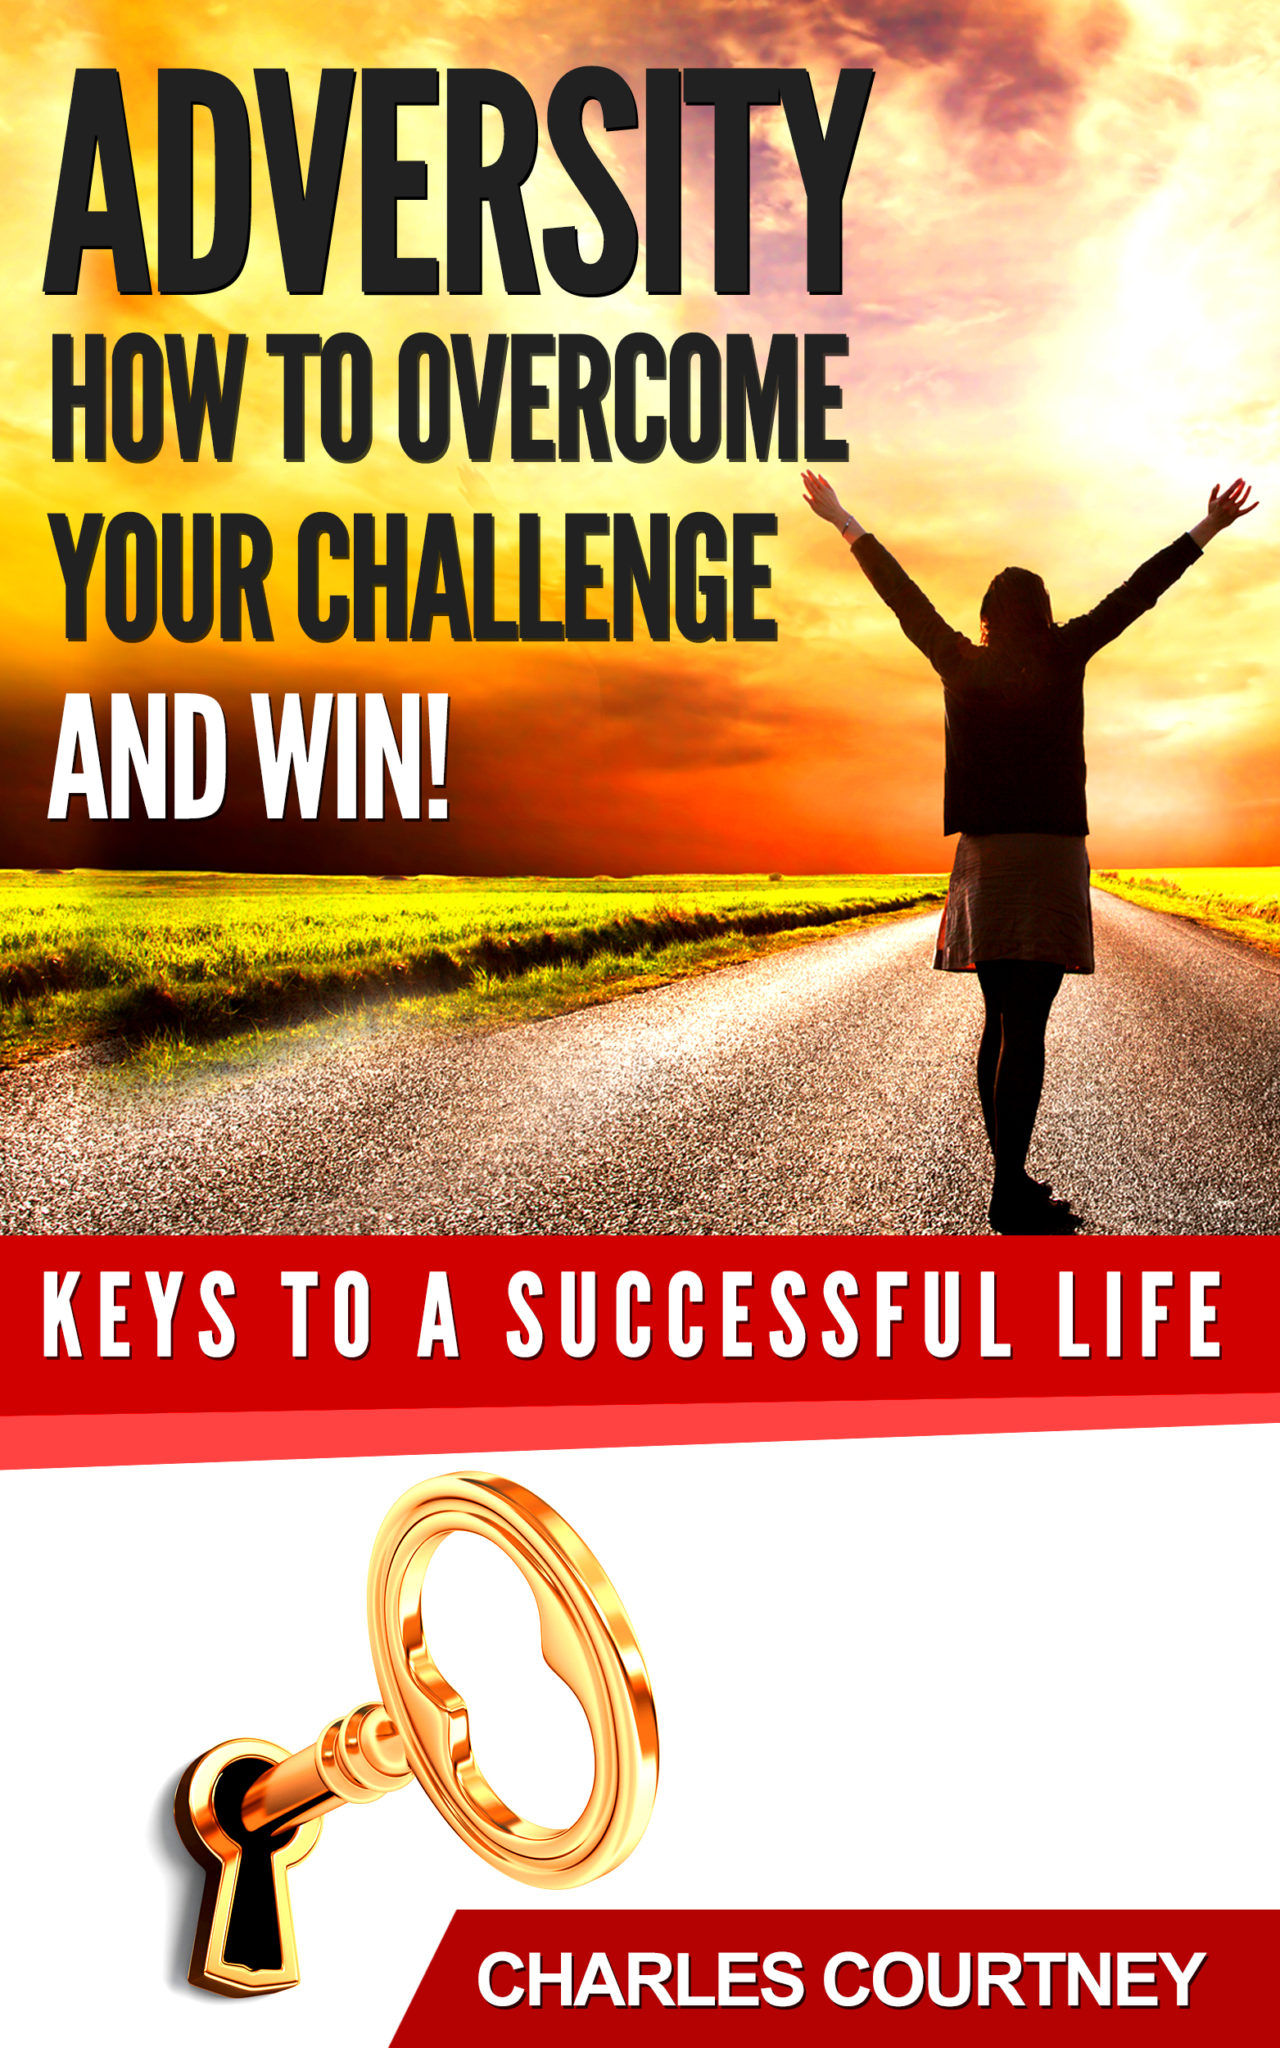 FREE: Addiction. How To Beat It And Win! by Charles Courtney